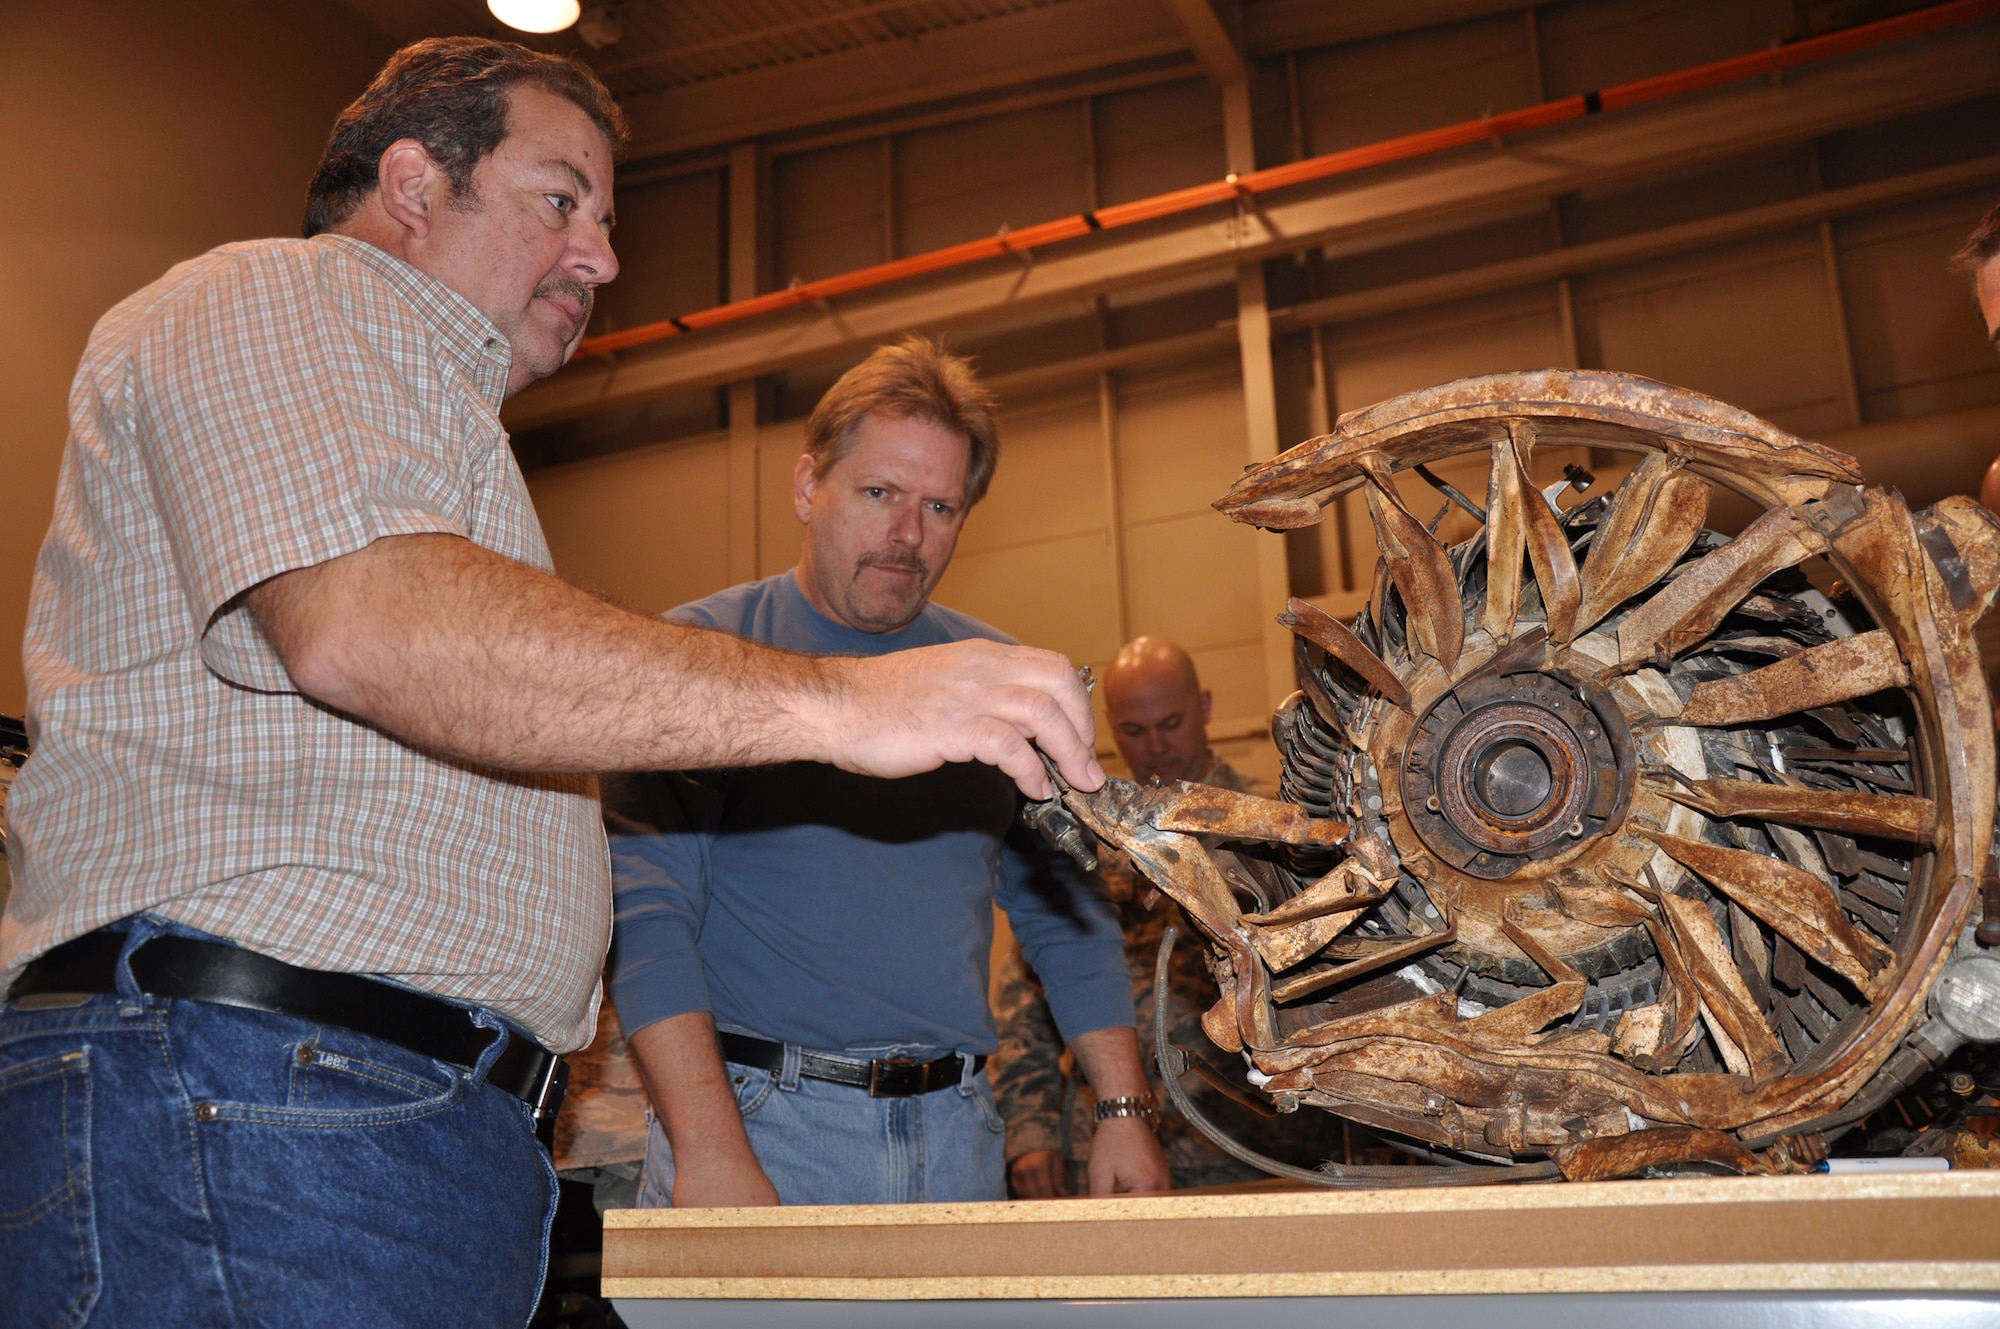 David Knauer, left, and Brad Bianchi look at a jet engine at the 361st Training Squadron's Jet Engine Mishap Investigation Course that was destroyed by a bird years ago. Mr. Knauer, a course instructor, and other teach the nine-day course to help develop investigative techniques to those who could potentially be part of an accident investigation board. Mr. Bianchi is a quality assurance inspecter for the 75th Propulsion Maintenance Group at Tinker Air Force Base, Okla. (U.S. Air Force photo/John Ingle)